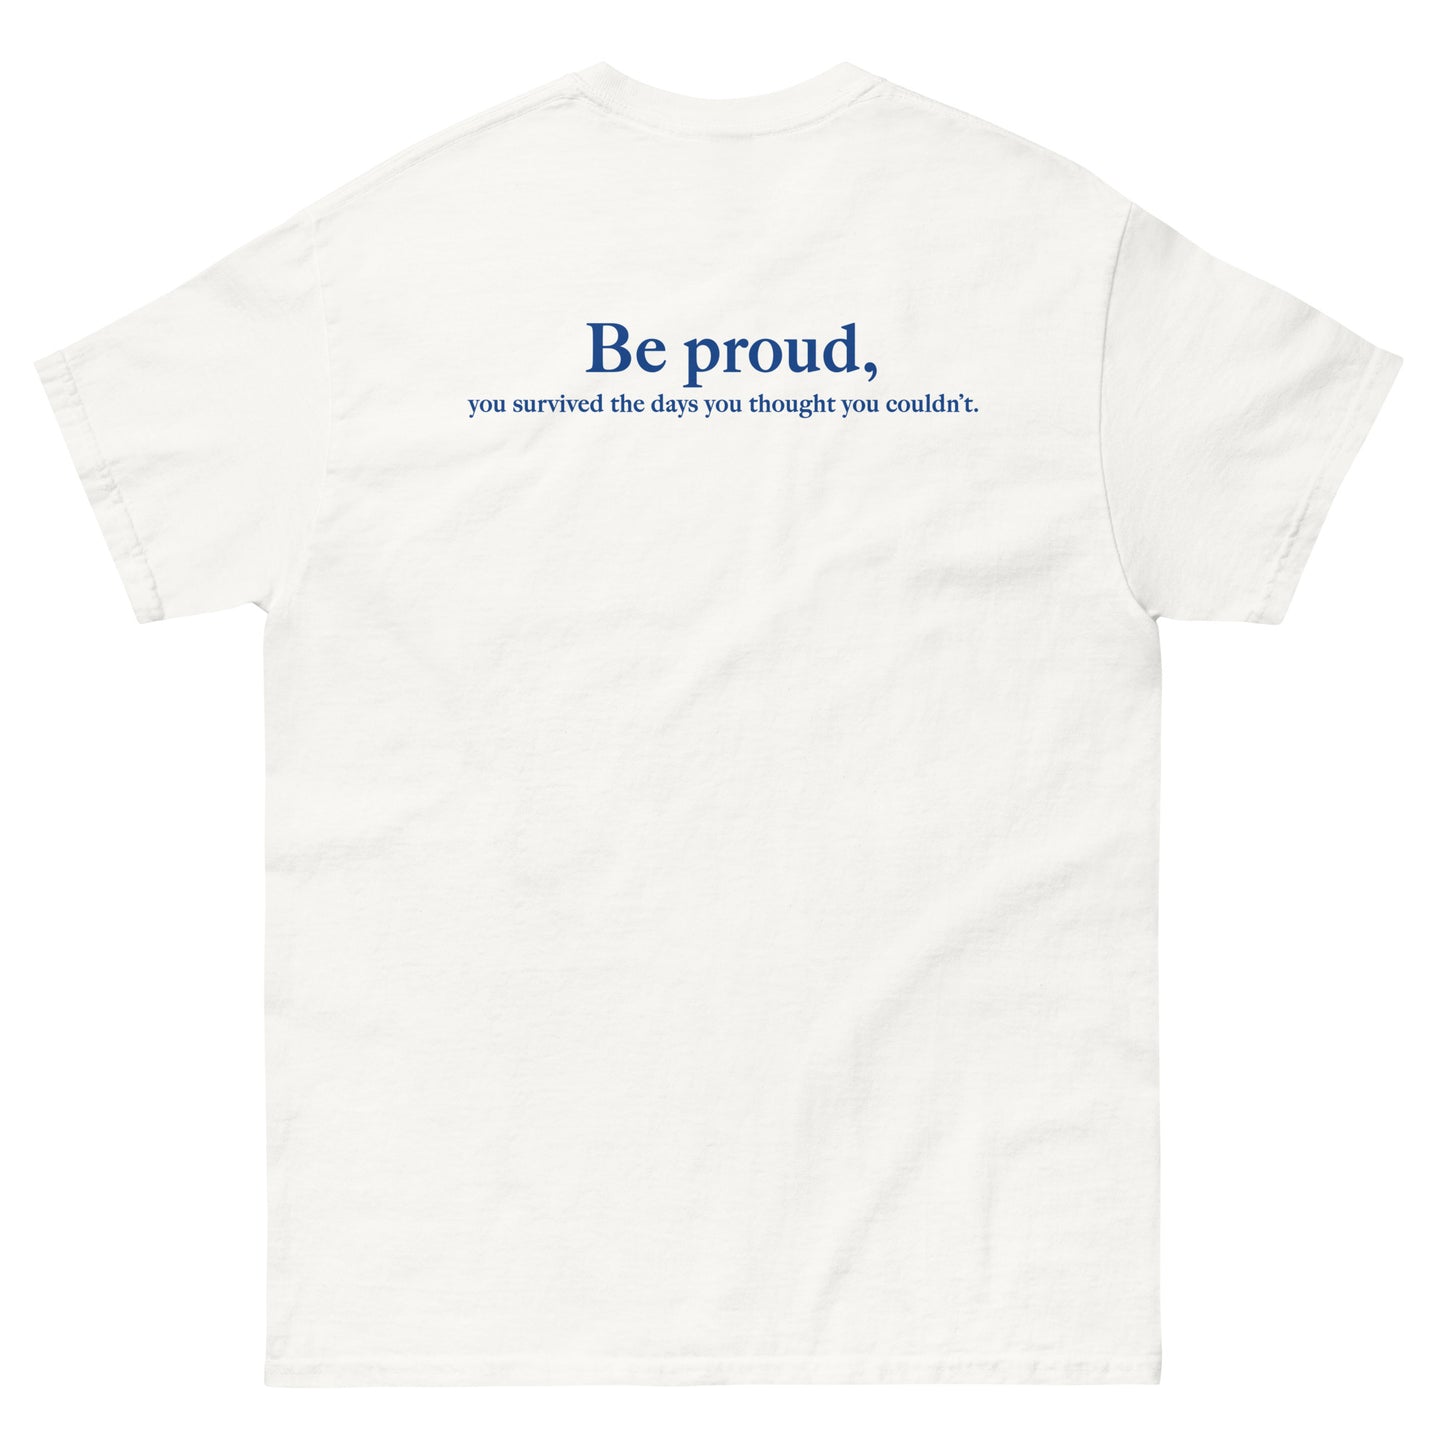 White High Quality Tee - Front Design with "Be proud, " print on left chest - Back Design with a Phrase "Be proud, you survived the days you thought you couldn't." print